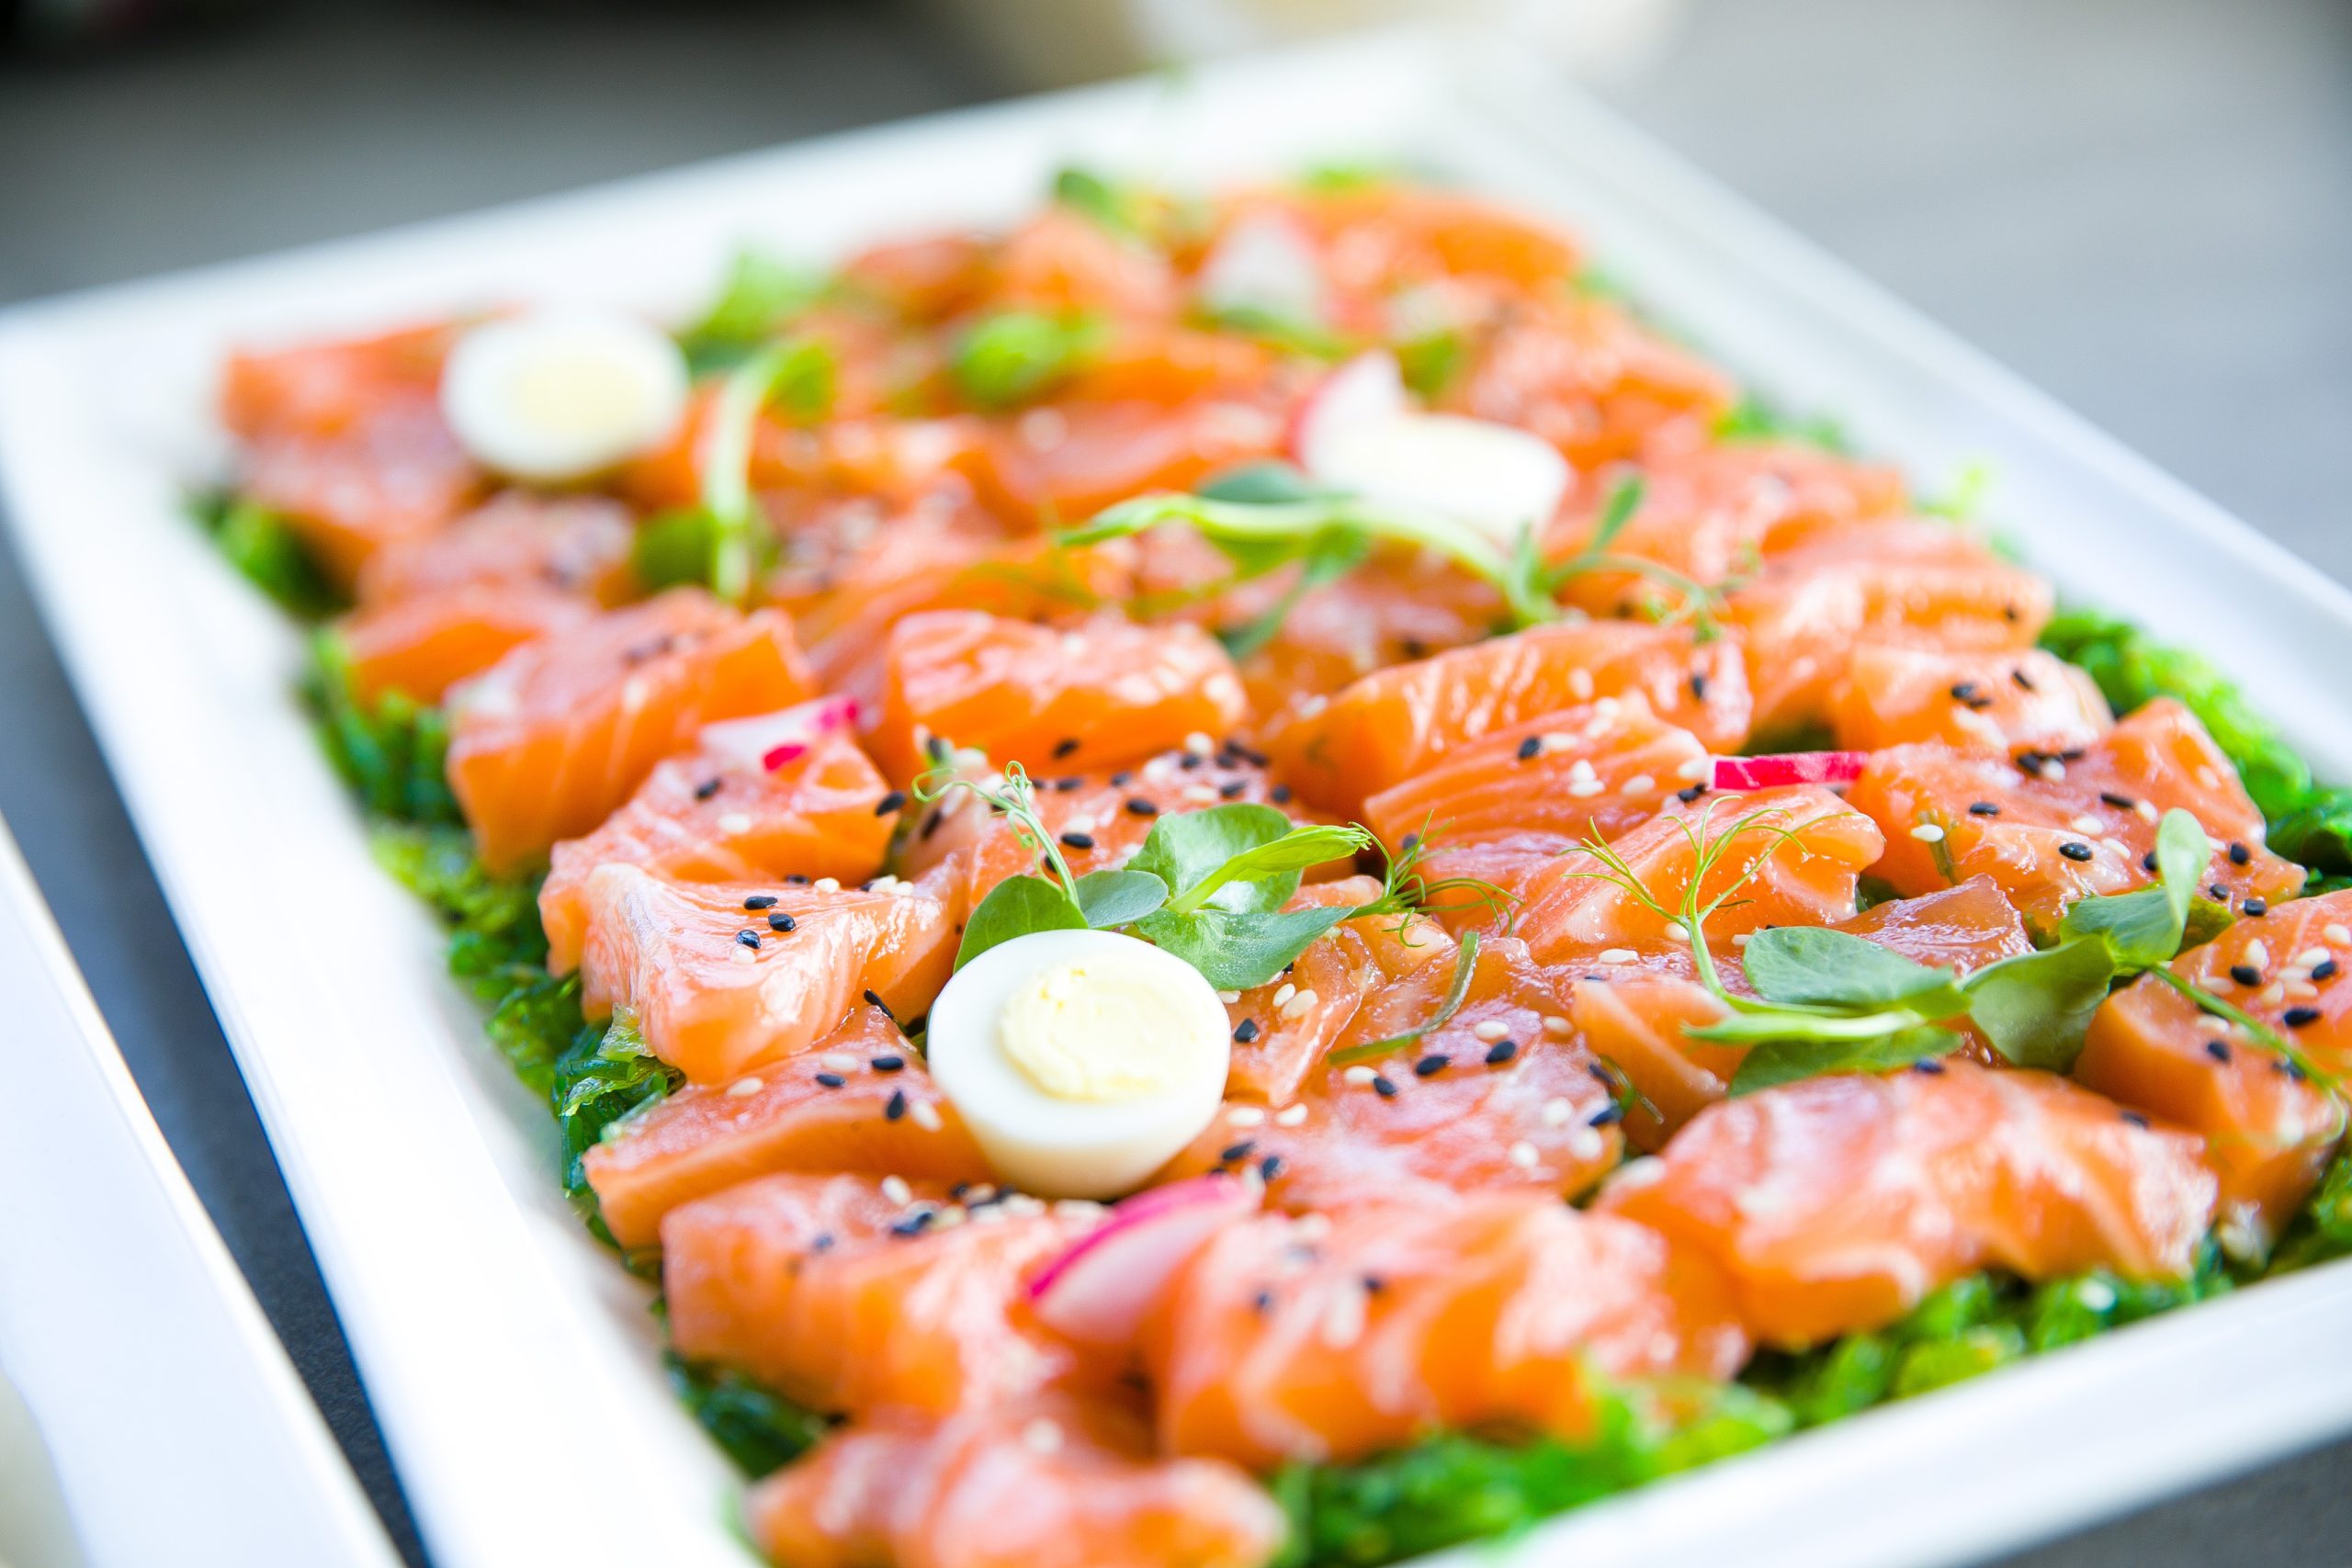 Salmon with greens and quail eggs